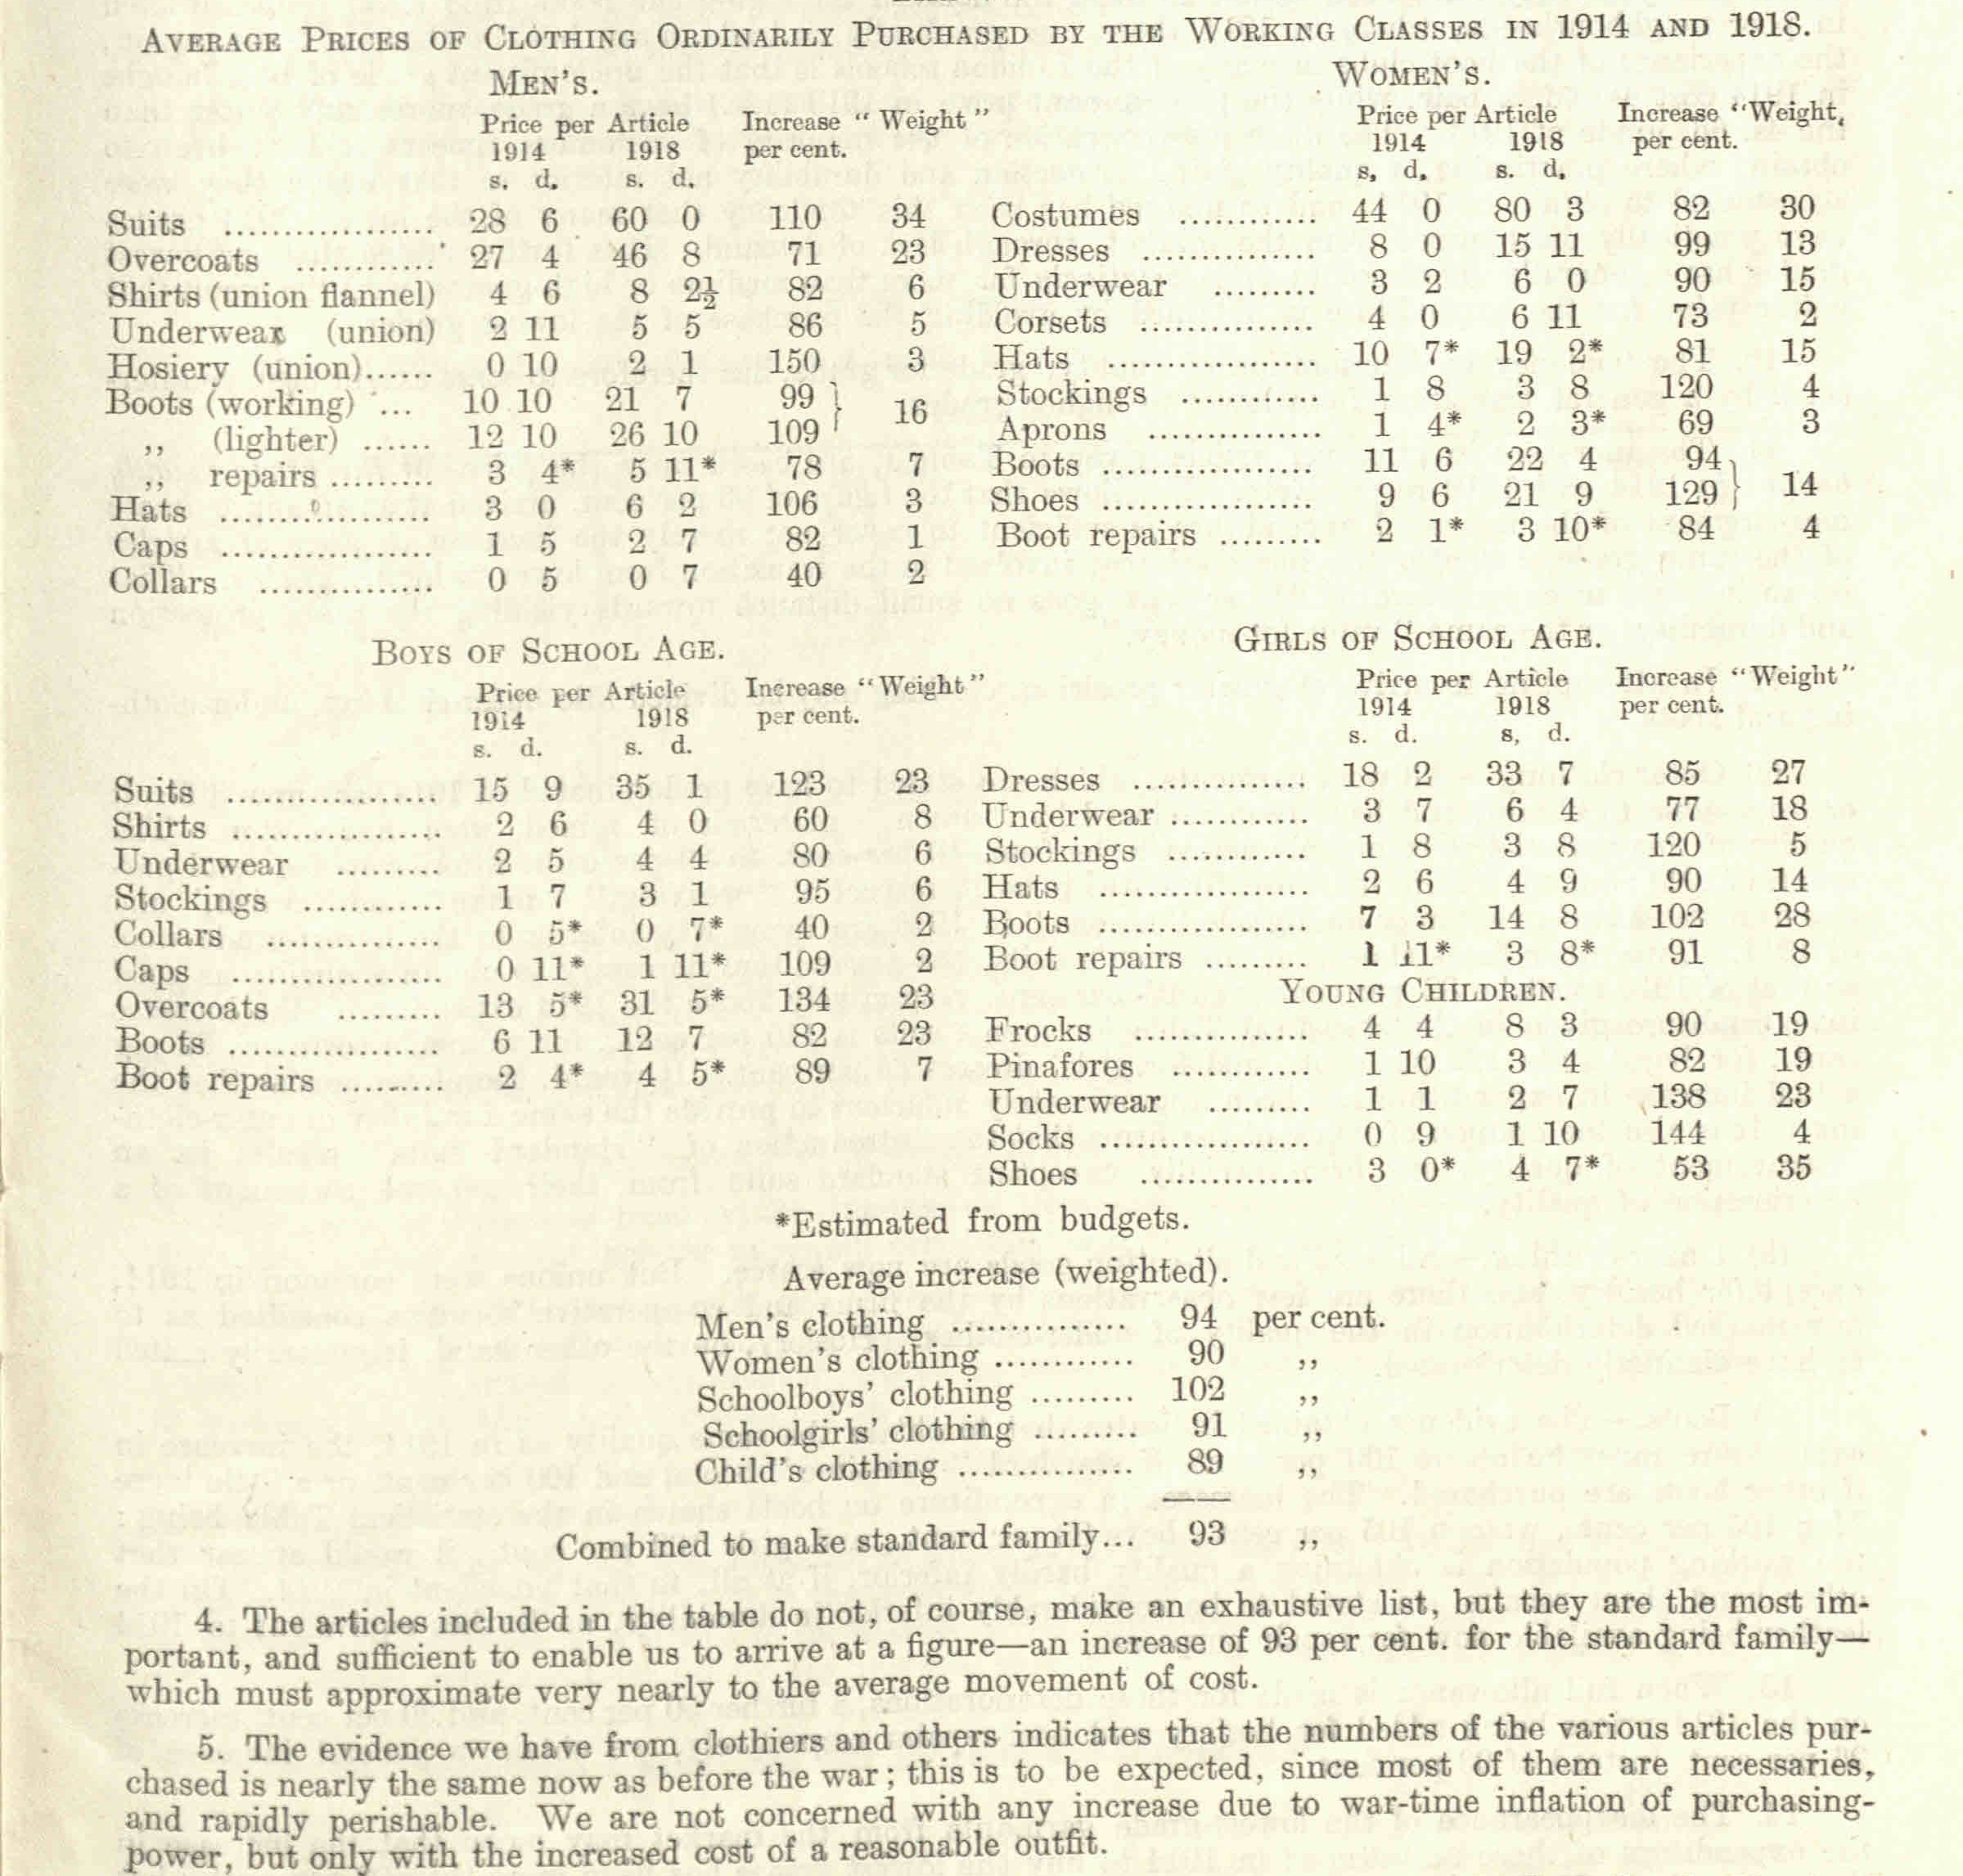 Information about the prices of commonly purchased items of men's, women's, girls' and boys' clothing in 1914 and 1918